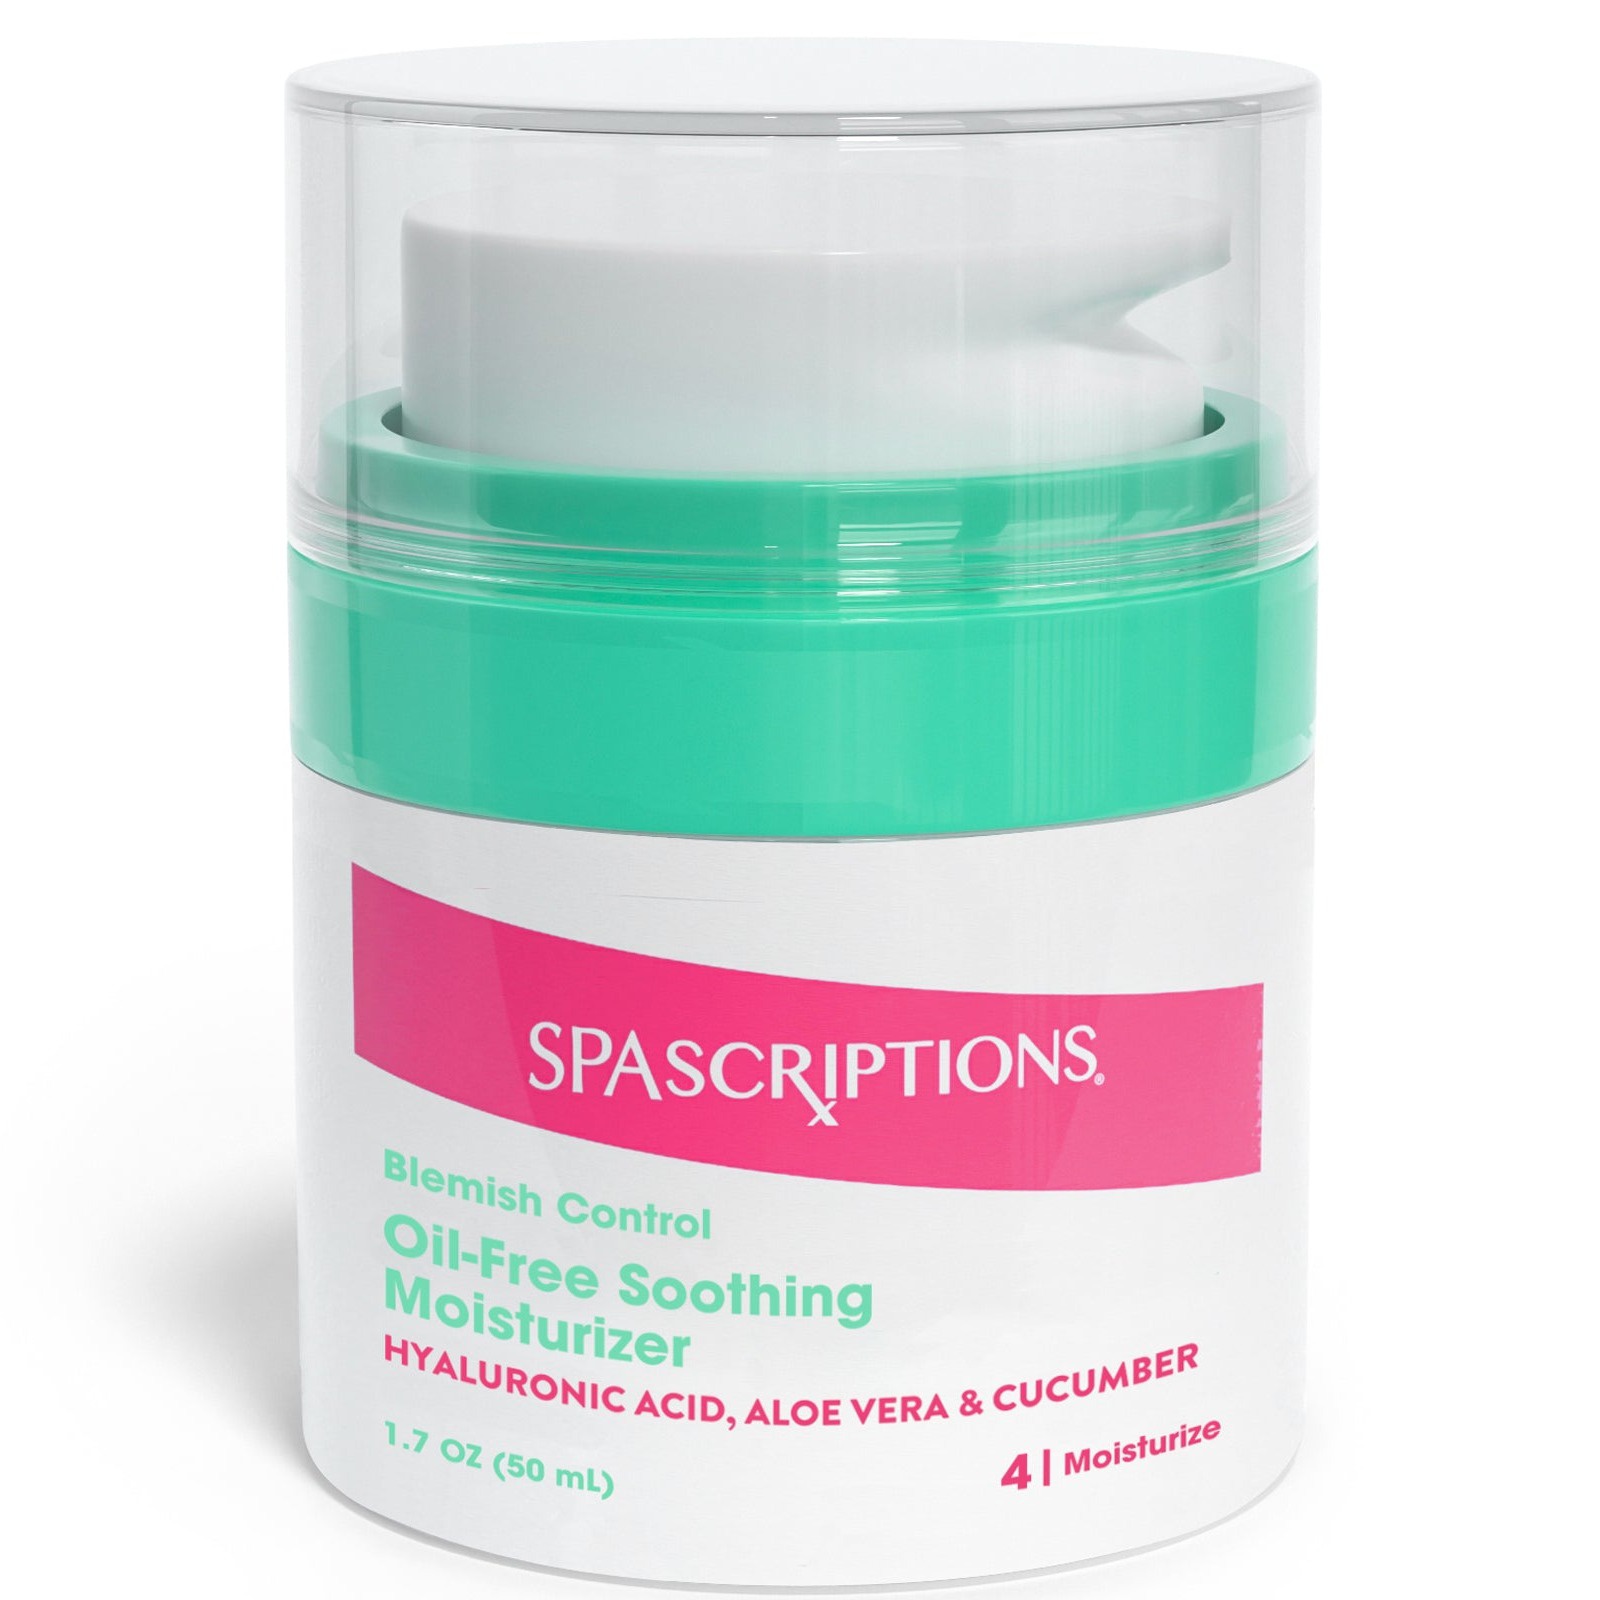 Spascriptions Oil-free Soothing Moisturizer